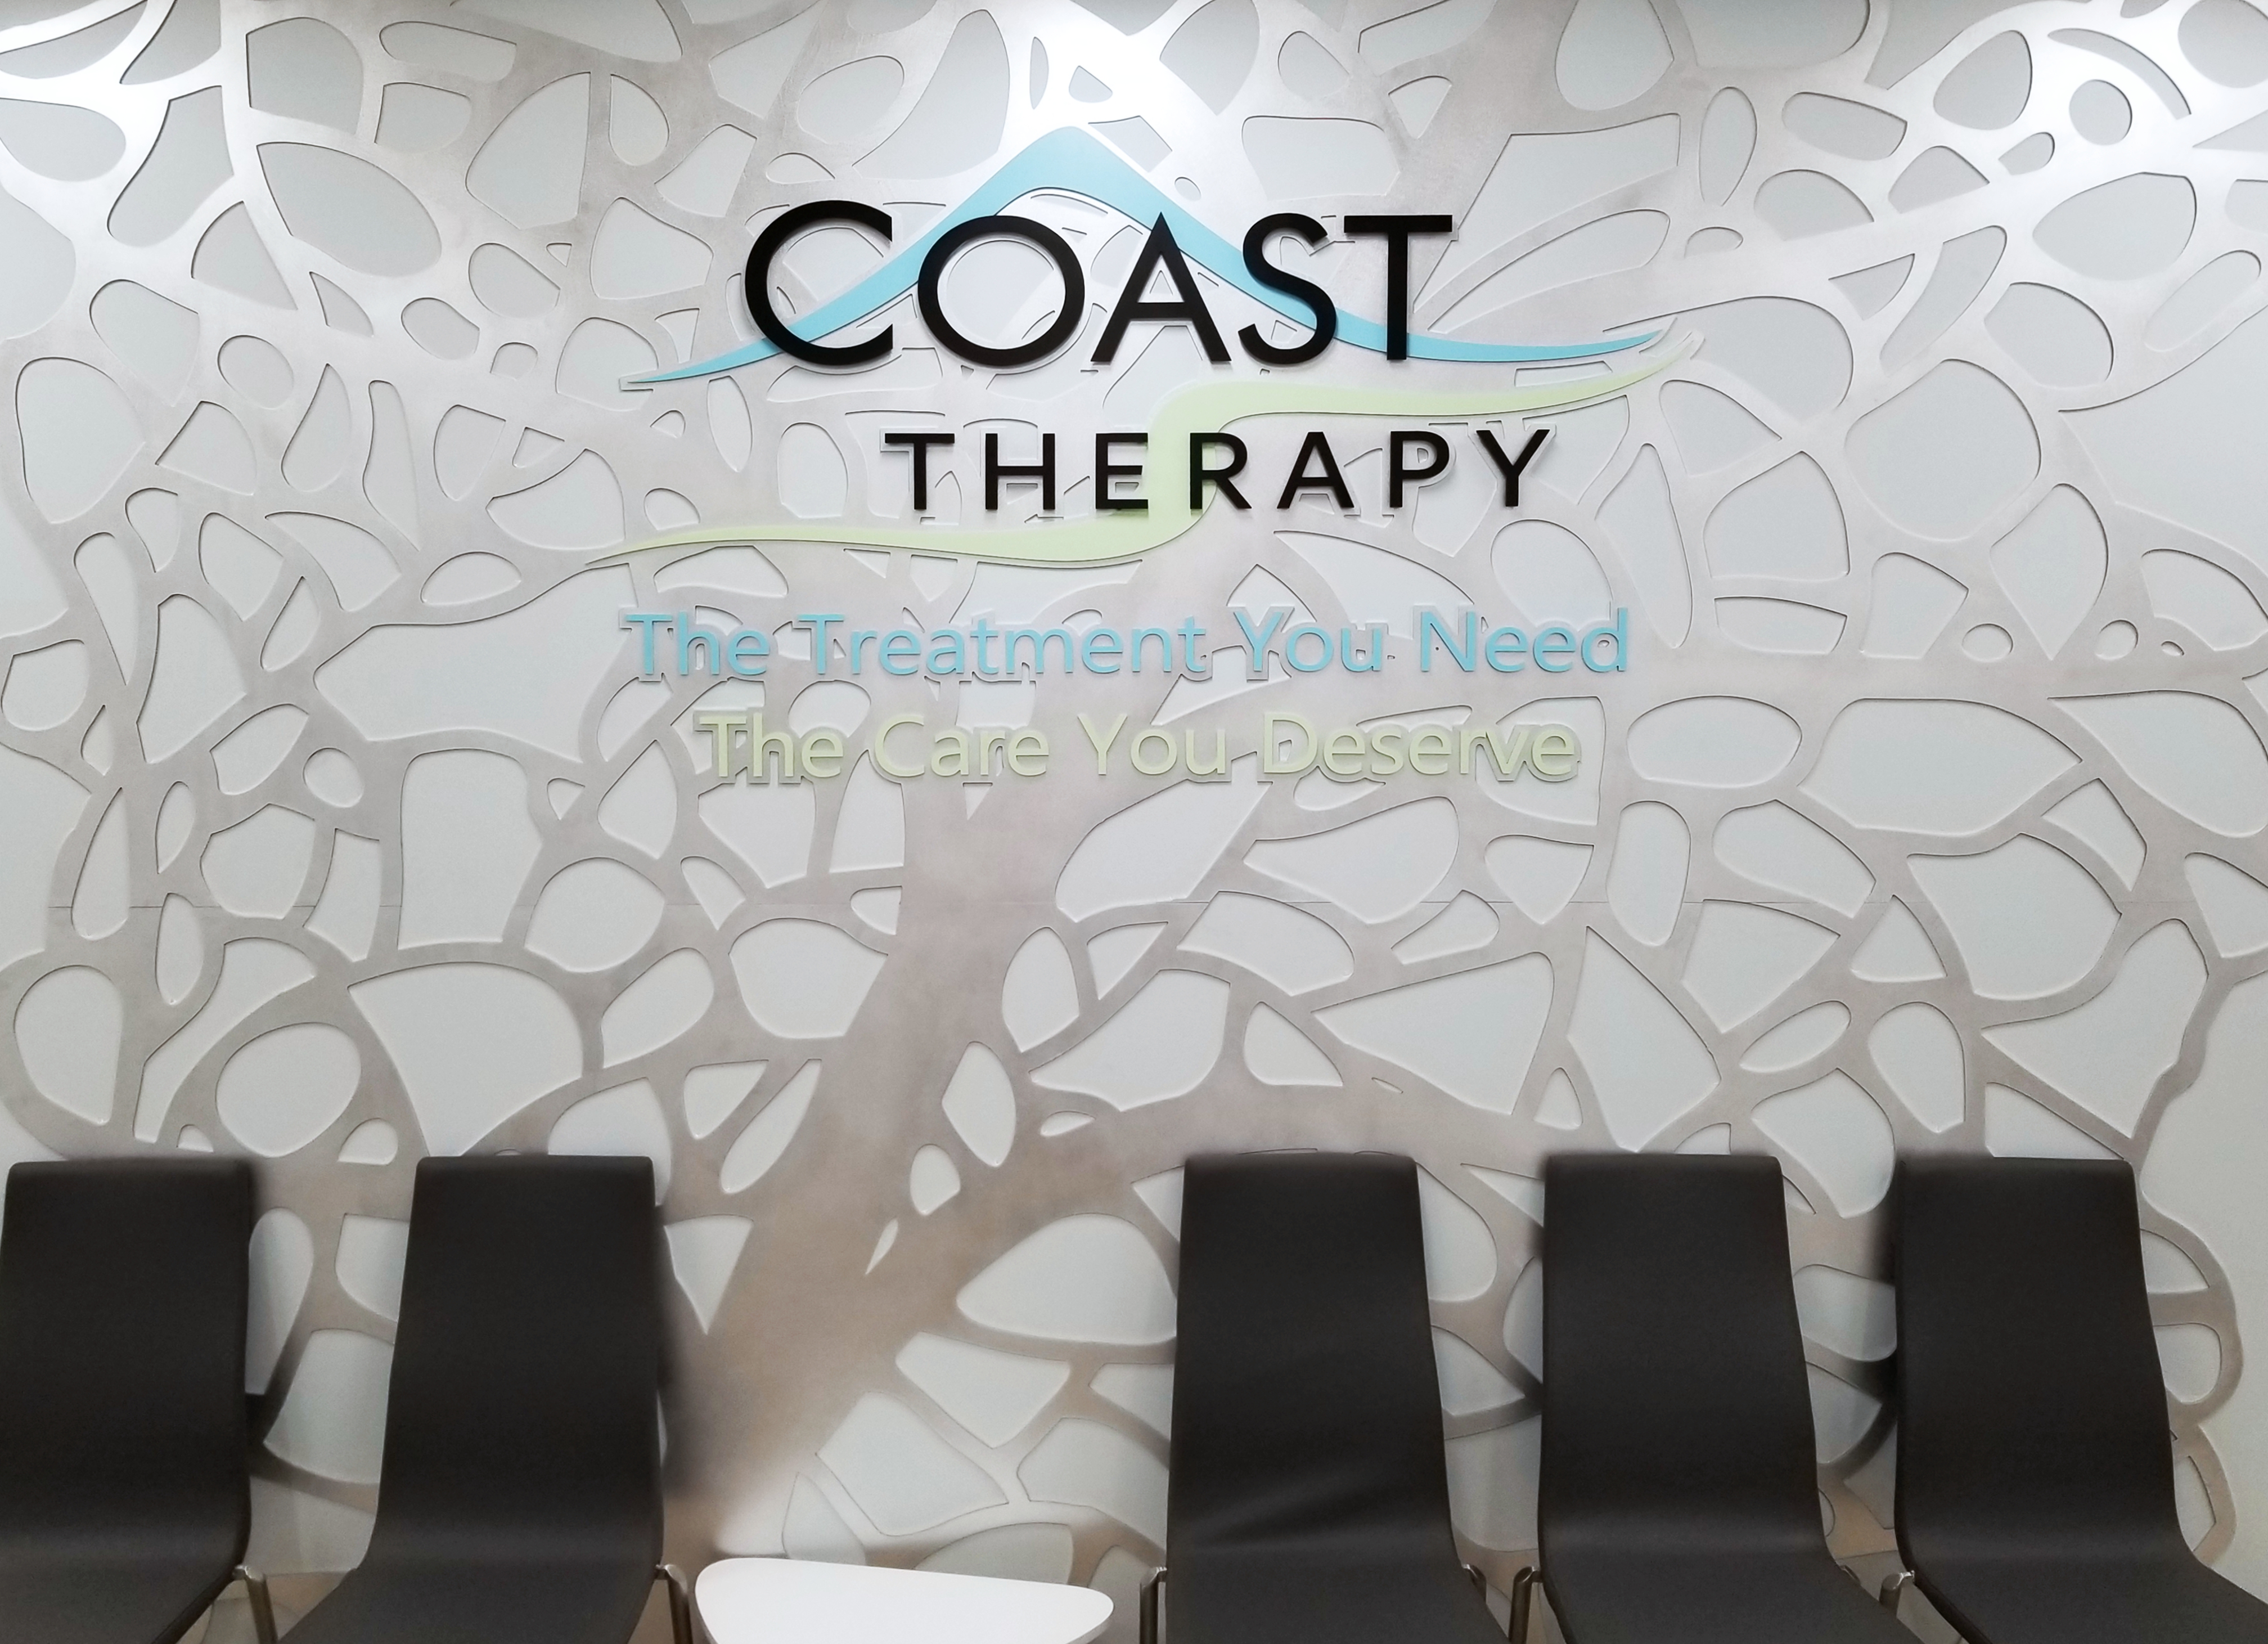 Coast Therapy feature wall